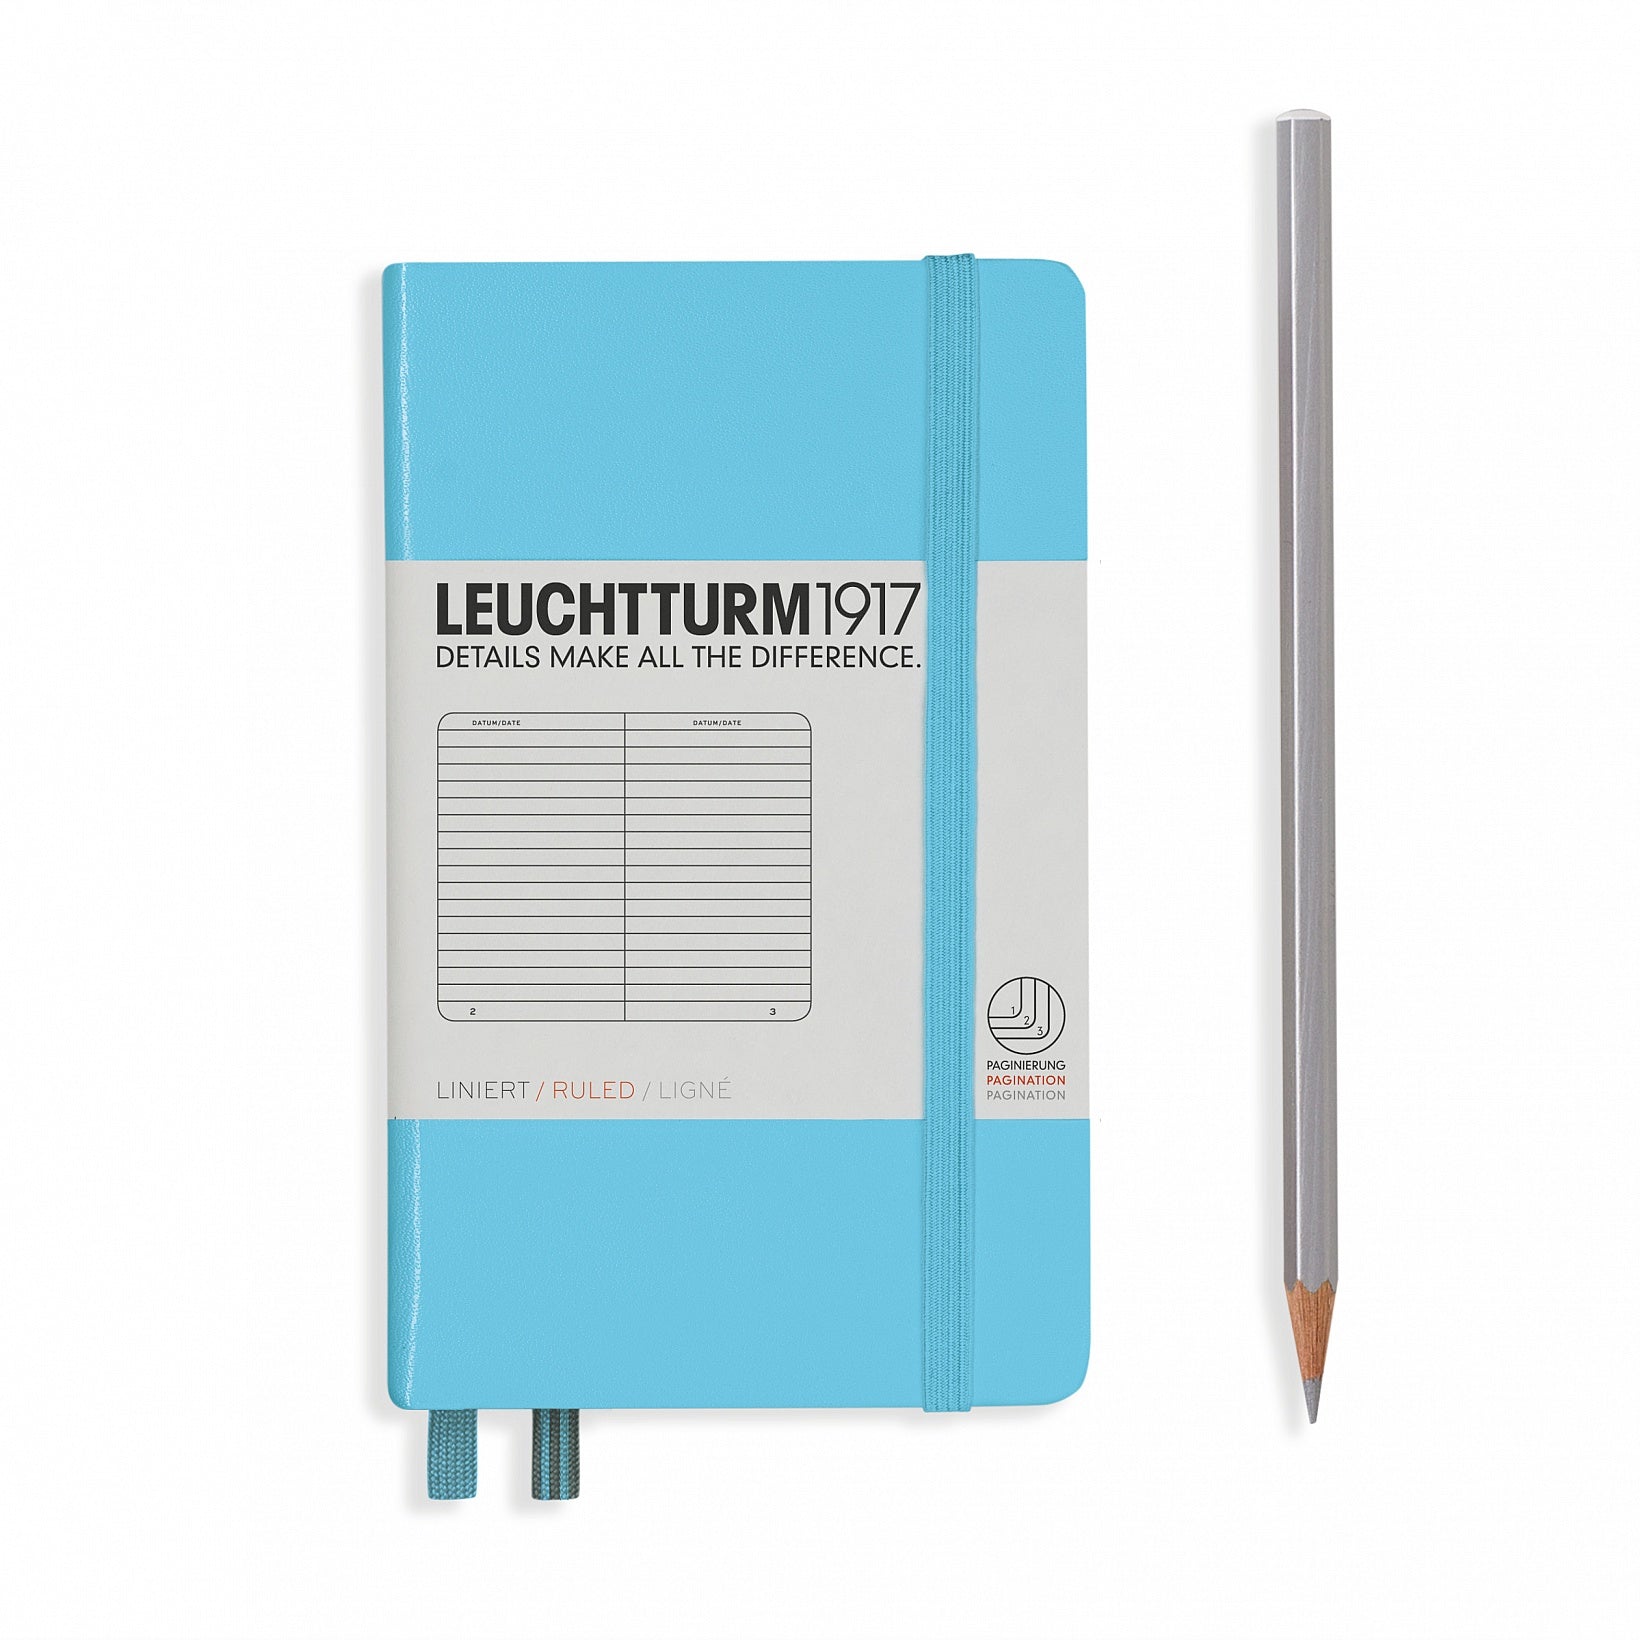 Leuchtturm1917 Hardcover Pocket Notebook - A6 - Nordic Blue - Dotted